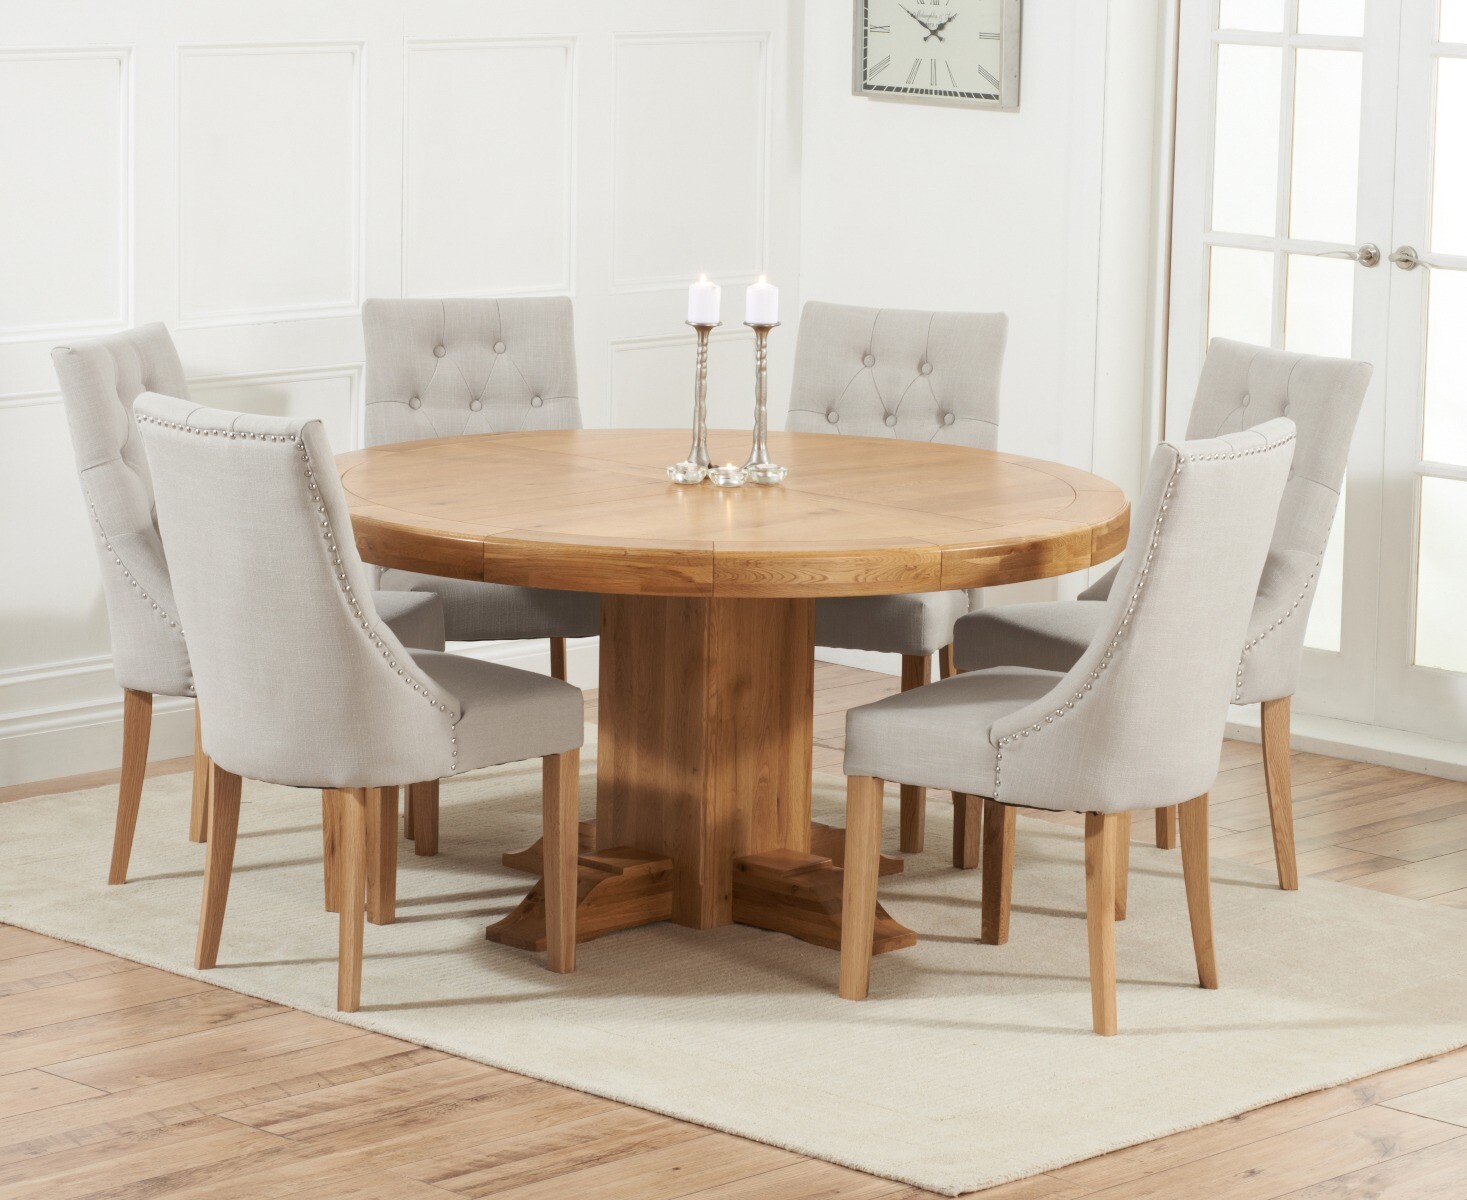 Photo 2 of Helmsley 150cm round oak dining table with 4 natural beatrix chairs